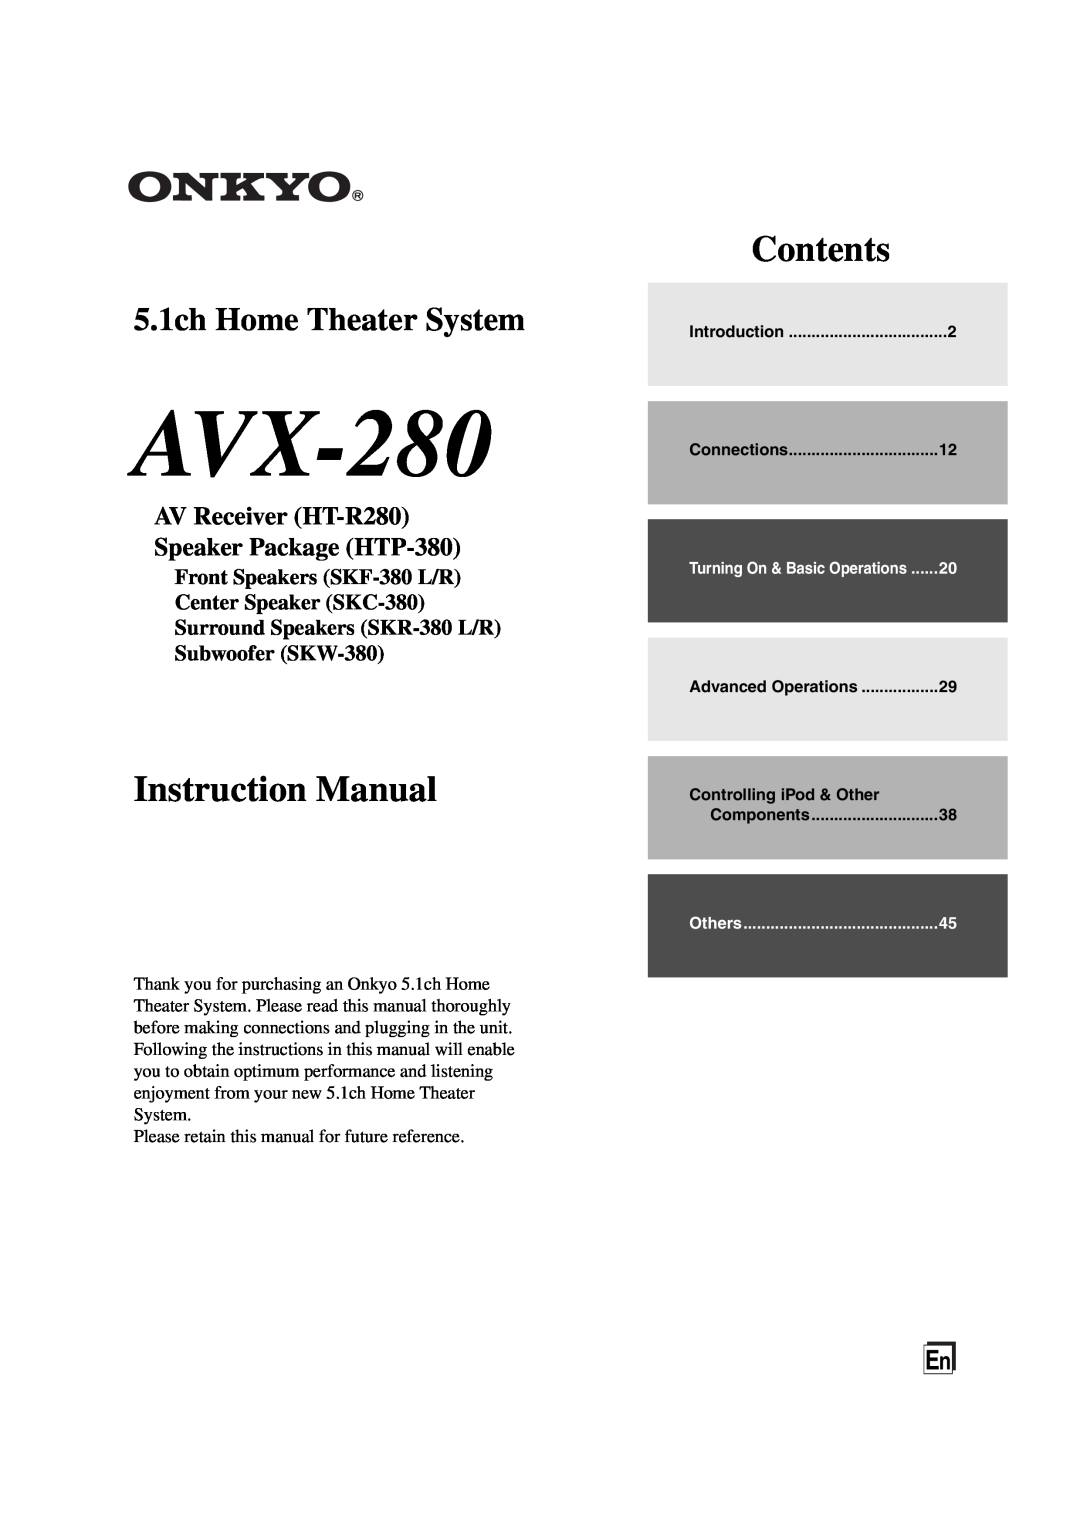 Onkyo AVX-280 instruction manual Front Speakers SKF-380L/R Center Speaker SKC-380, Contents, 5.1ch Home Theater System 